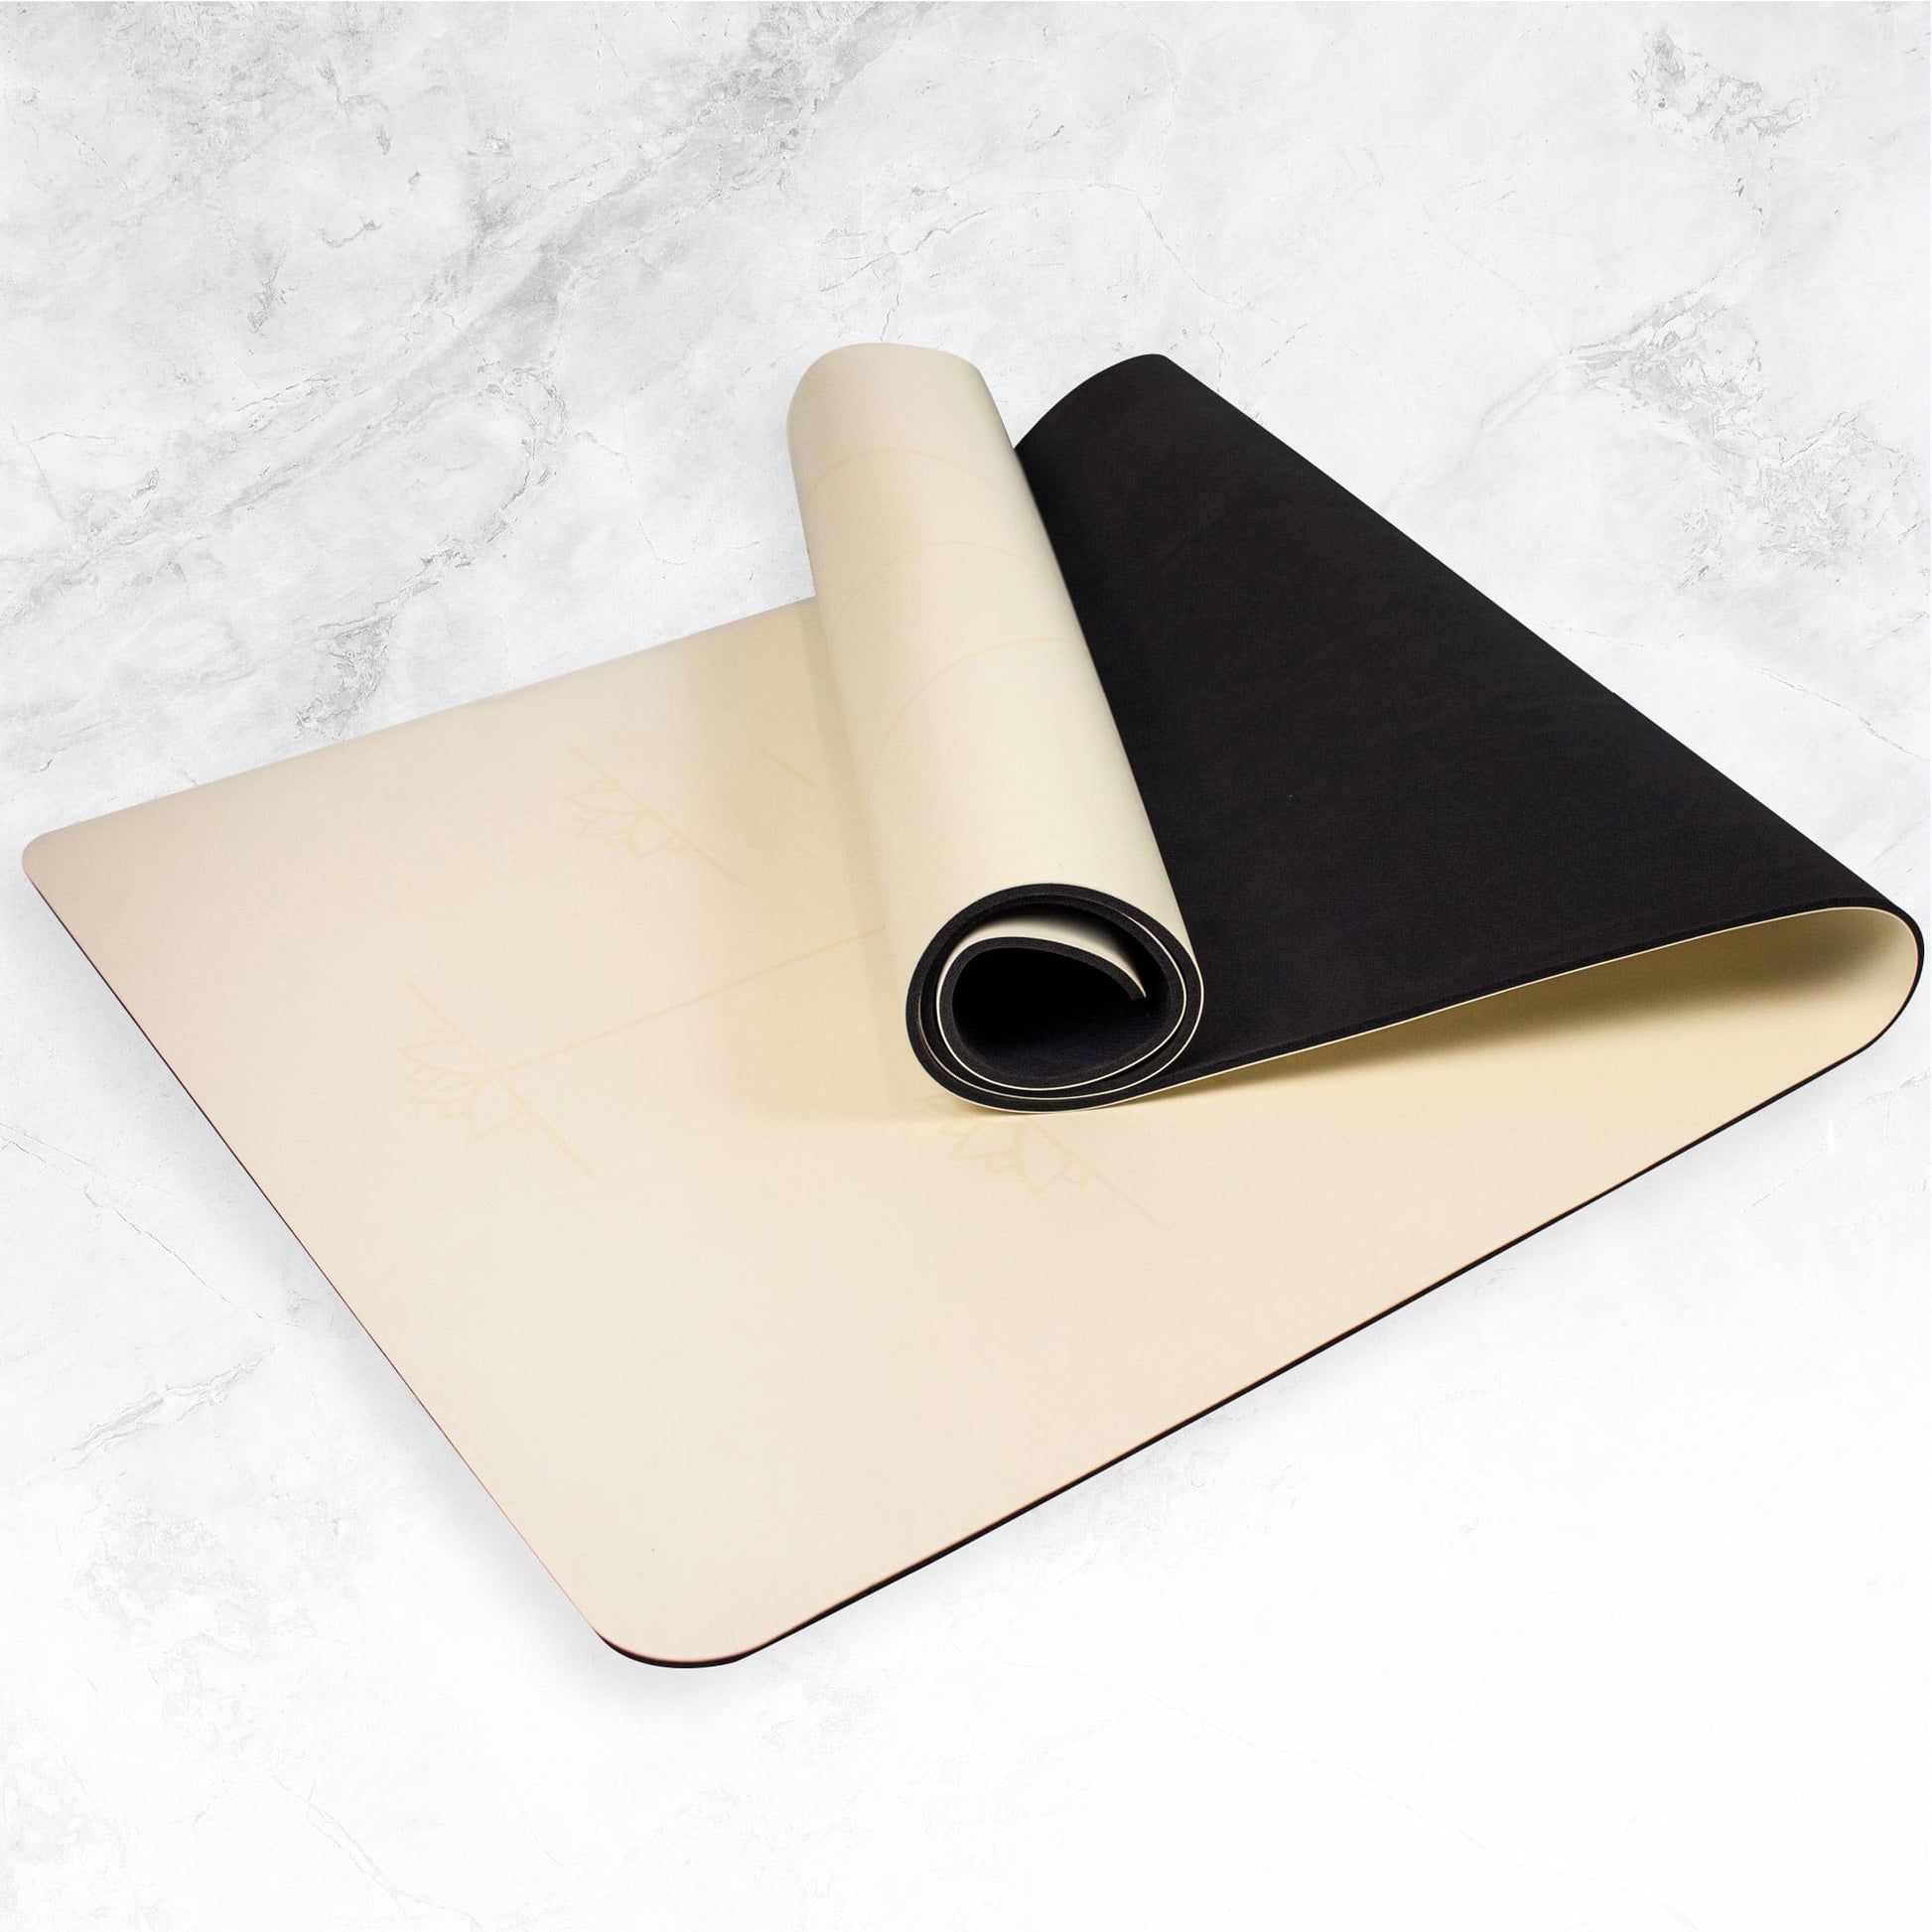 Have Some Fun With It - Cream Yoga Mat